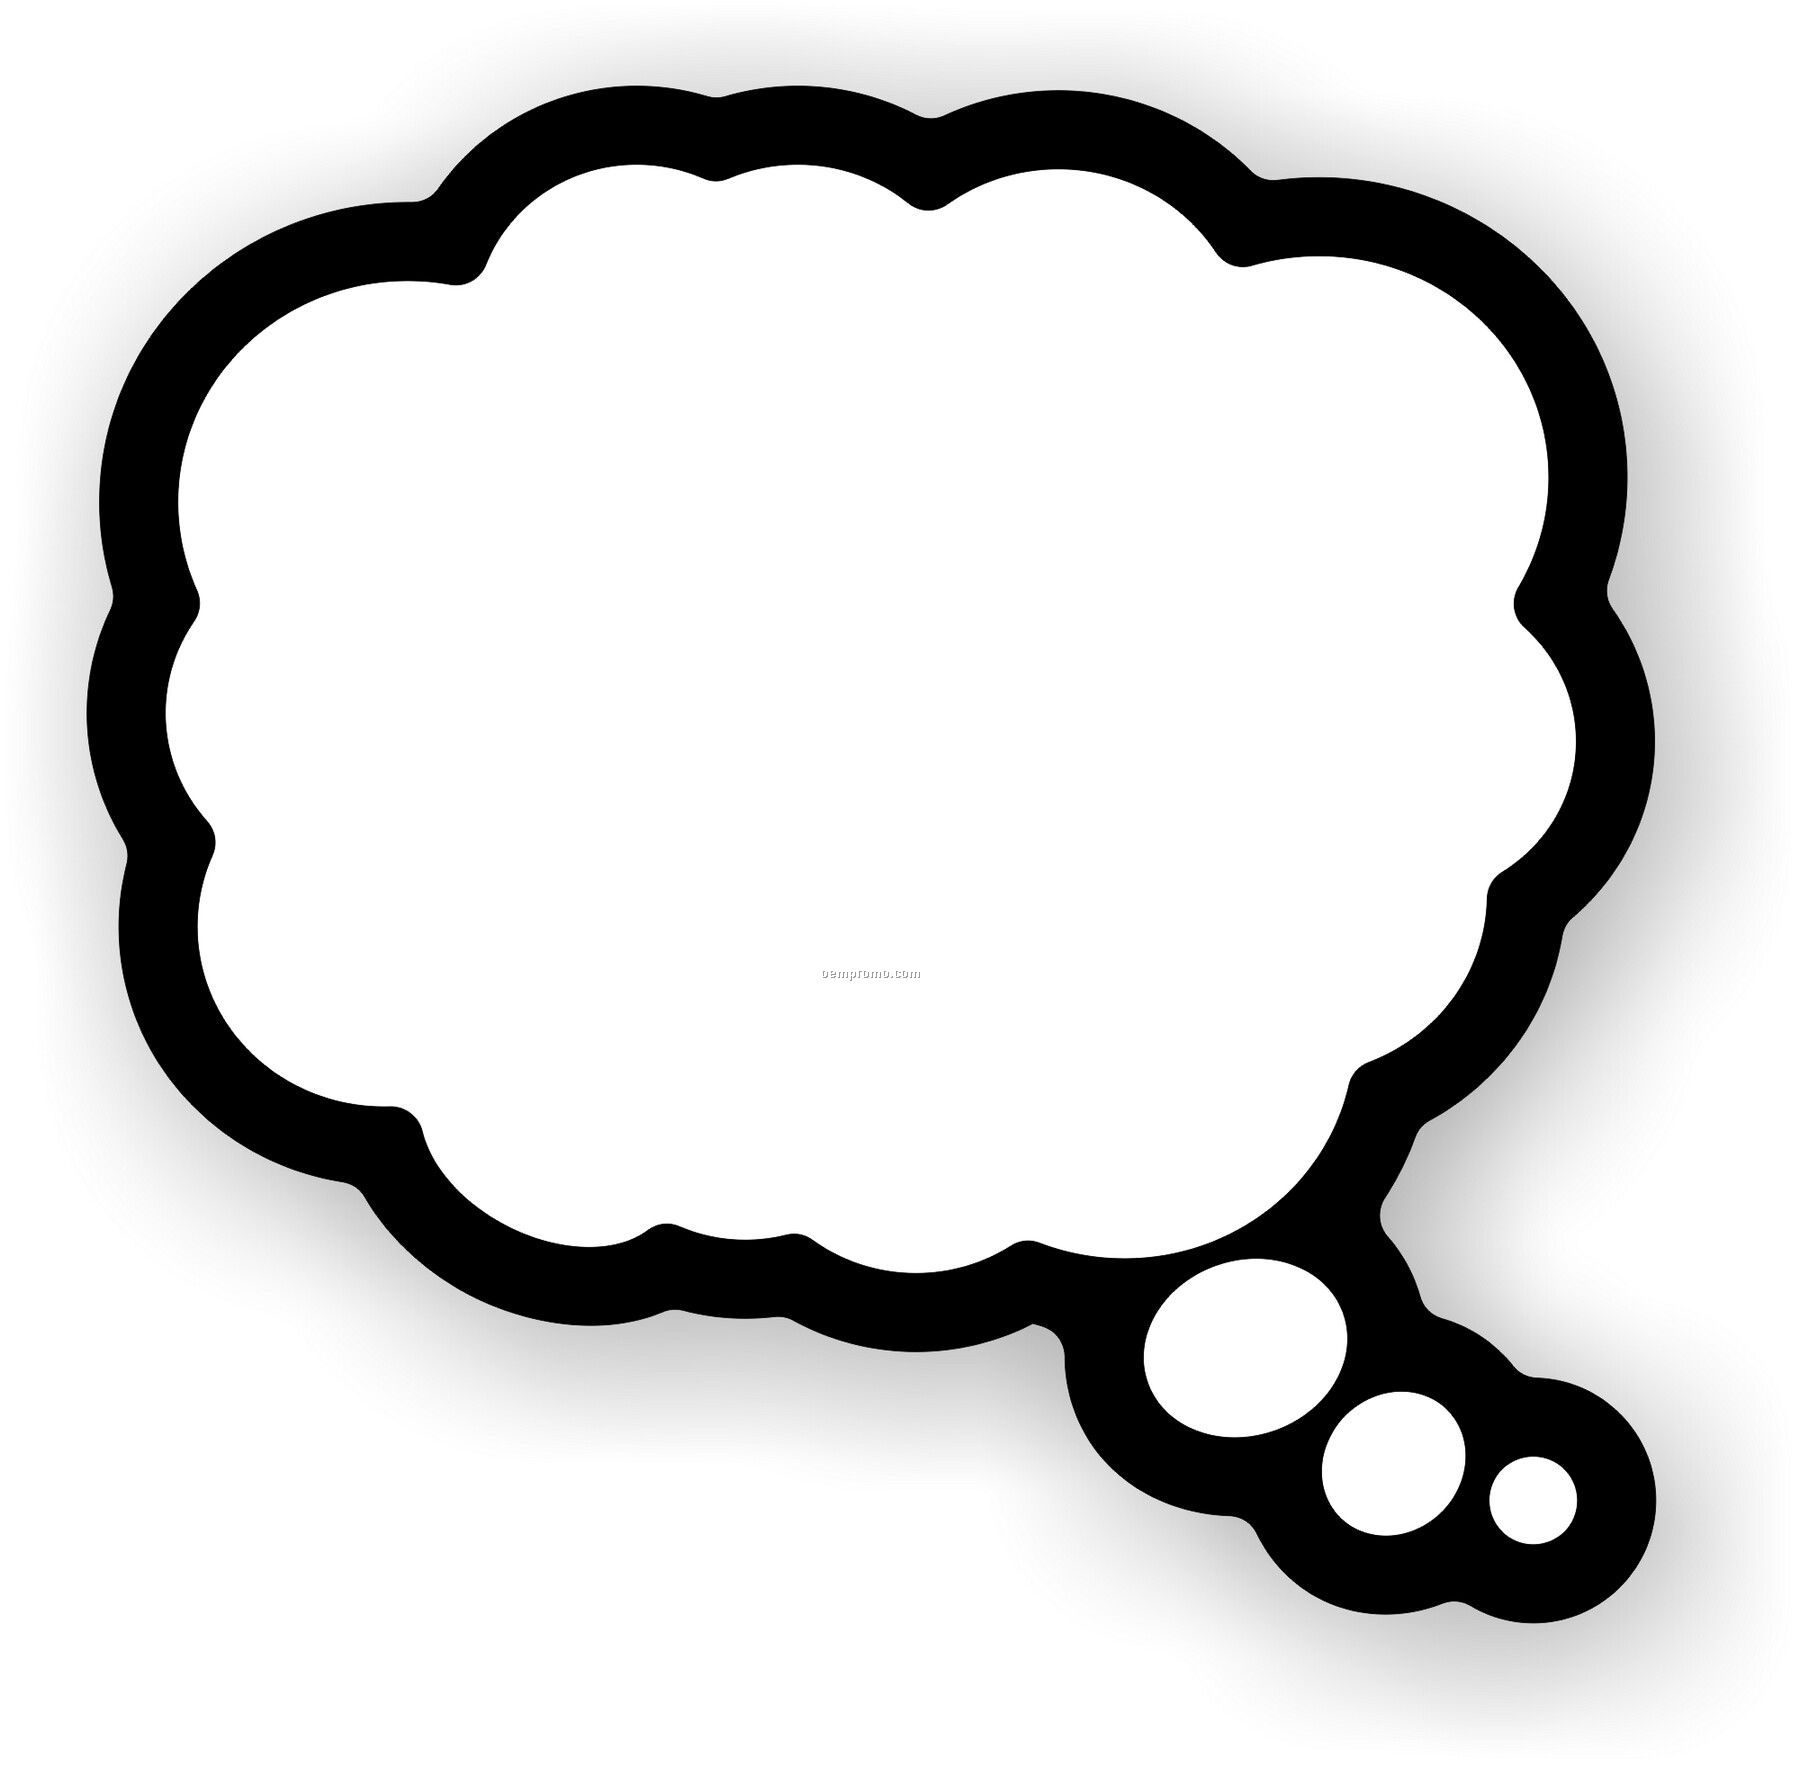 Thought Bubble Vector - ClipArt Best